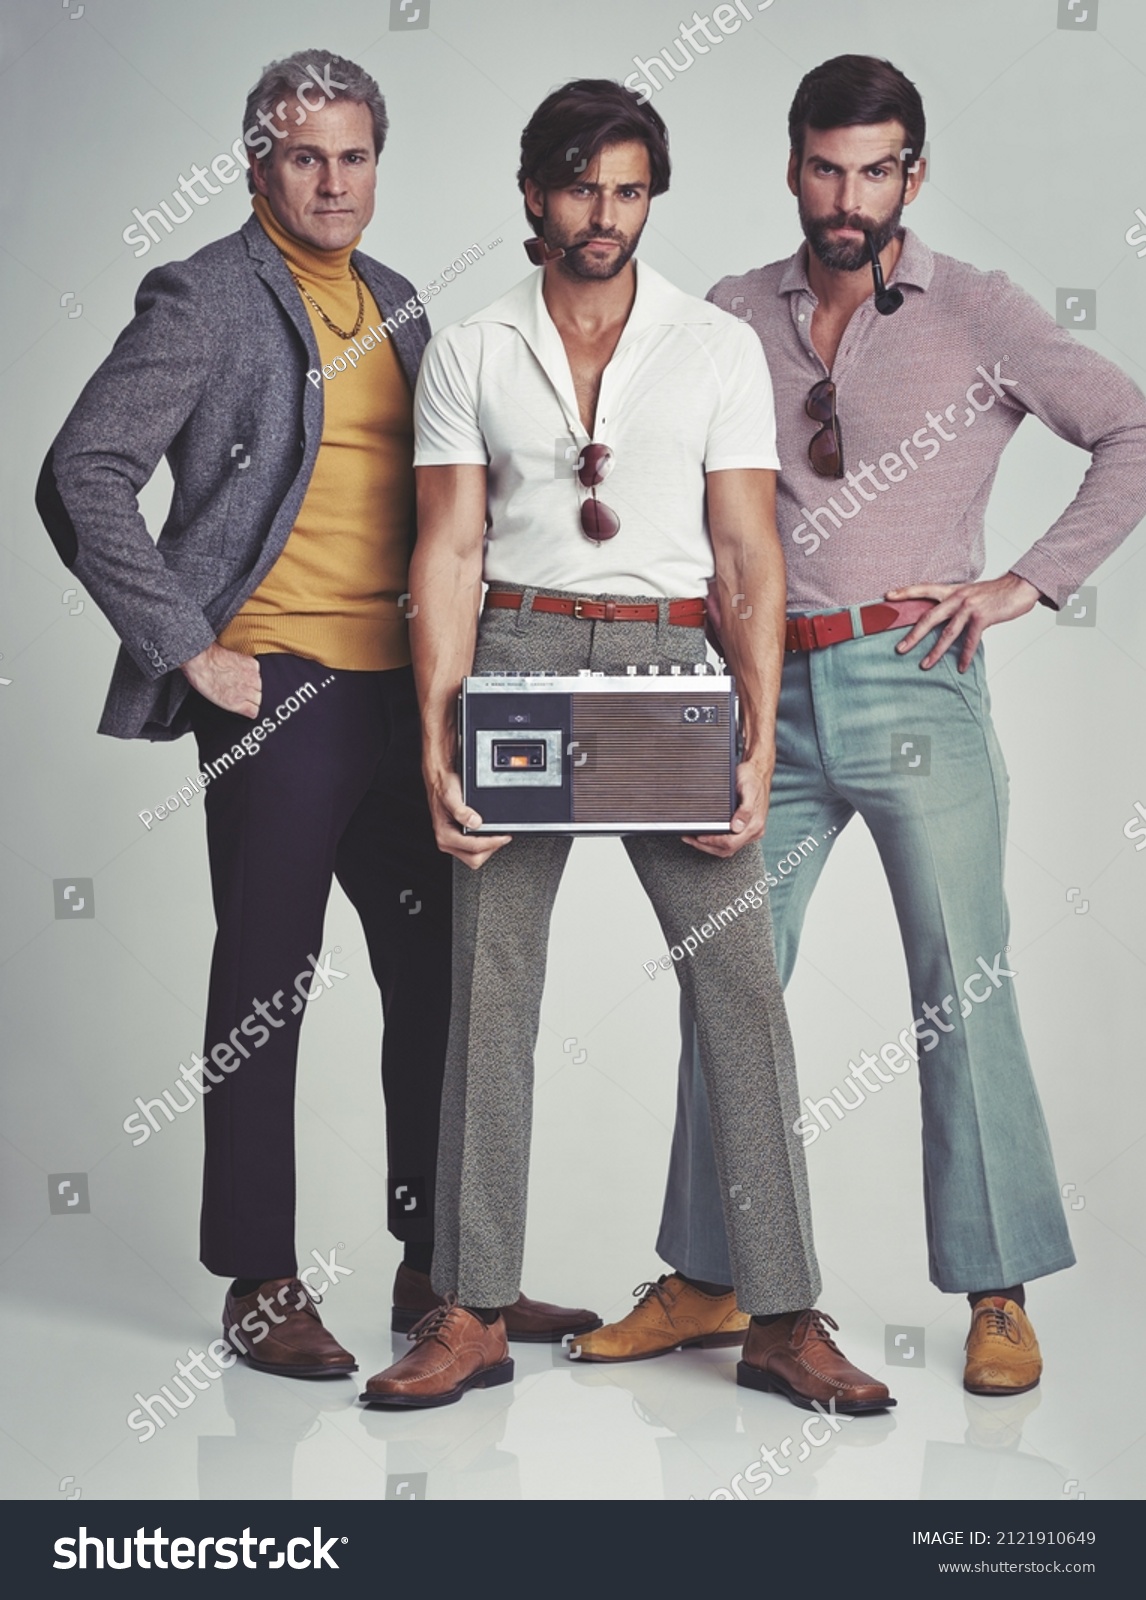 Ready to kick it retro style. A studio shot of three men clad in retro 70s wear holding a cassette player. #2121910649